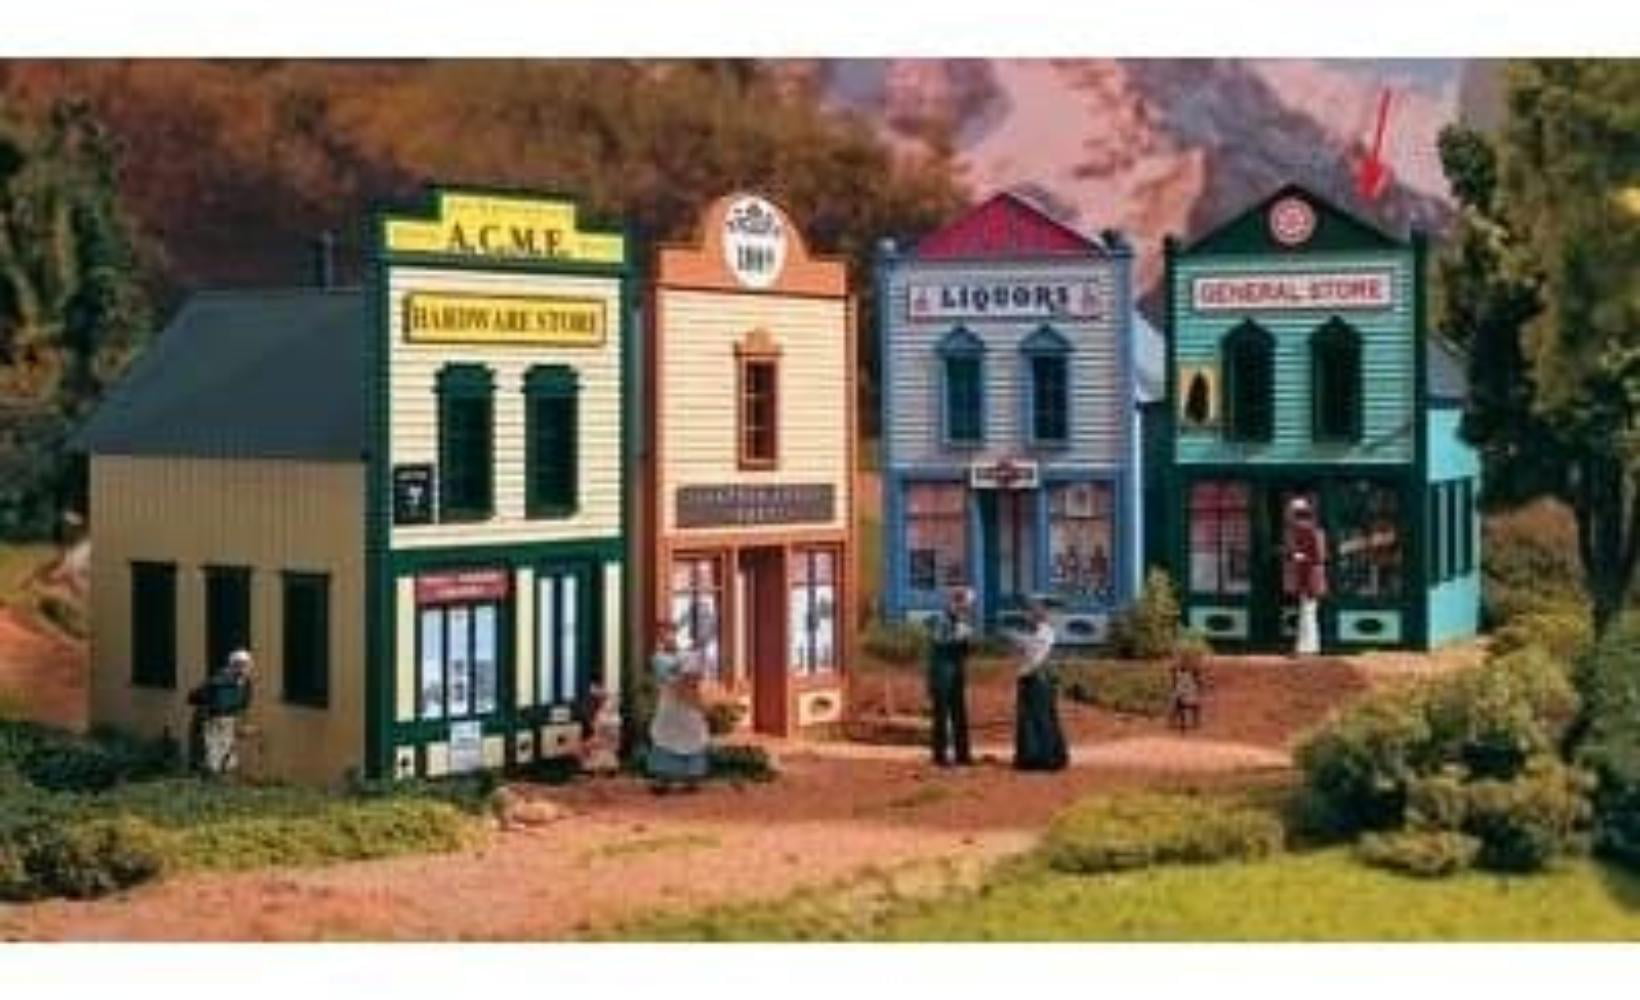 PIKO General G Scale Building Kit 62234 for sale online 